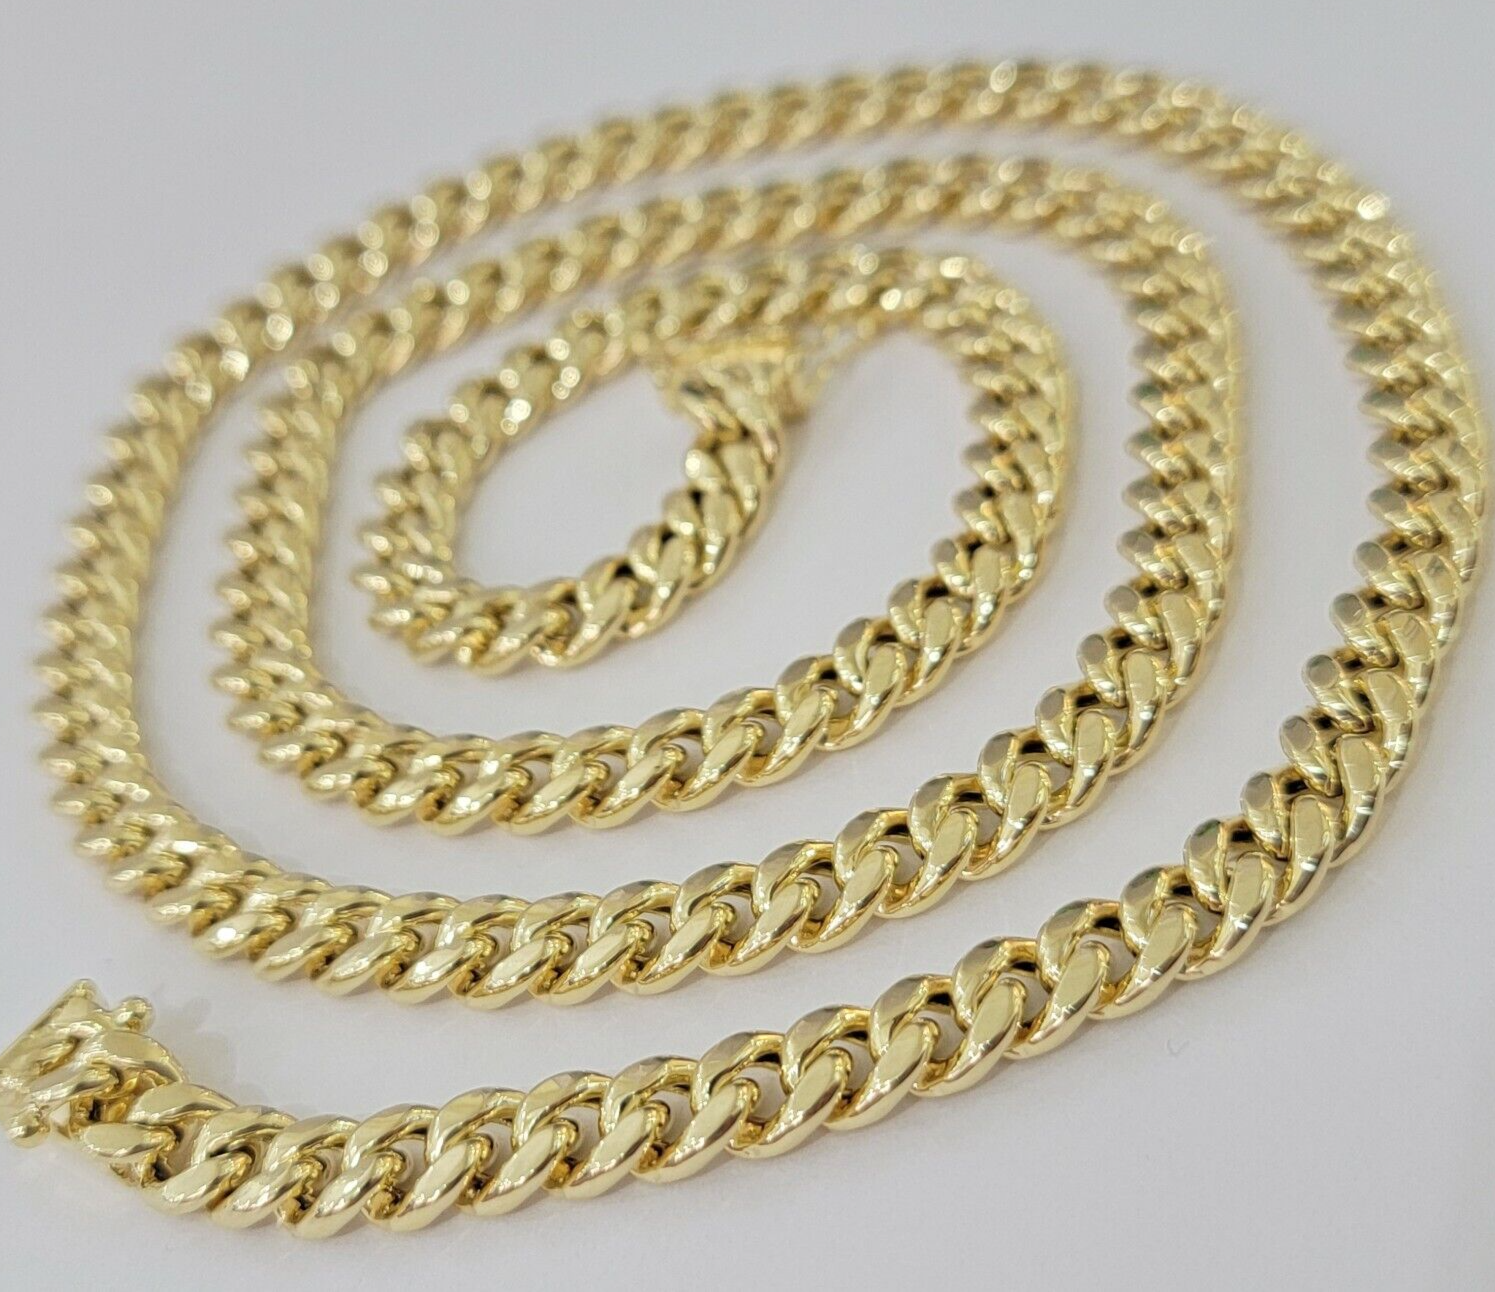 10k Gold Necklace 7mm 26 Inch Miami Cuban Link Chain REAL 10kt yellow Gold Men's